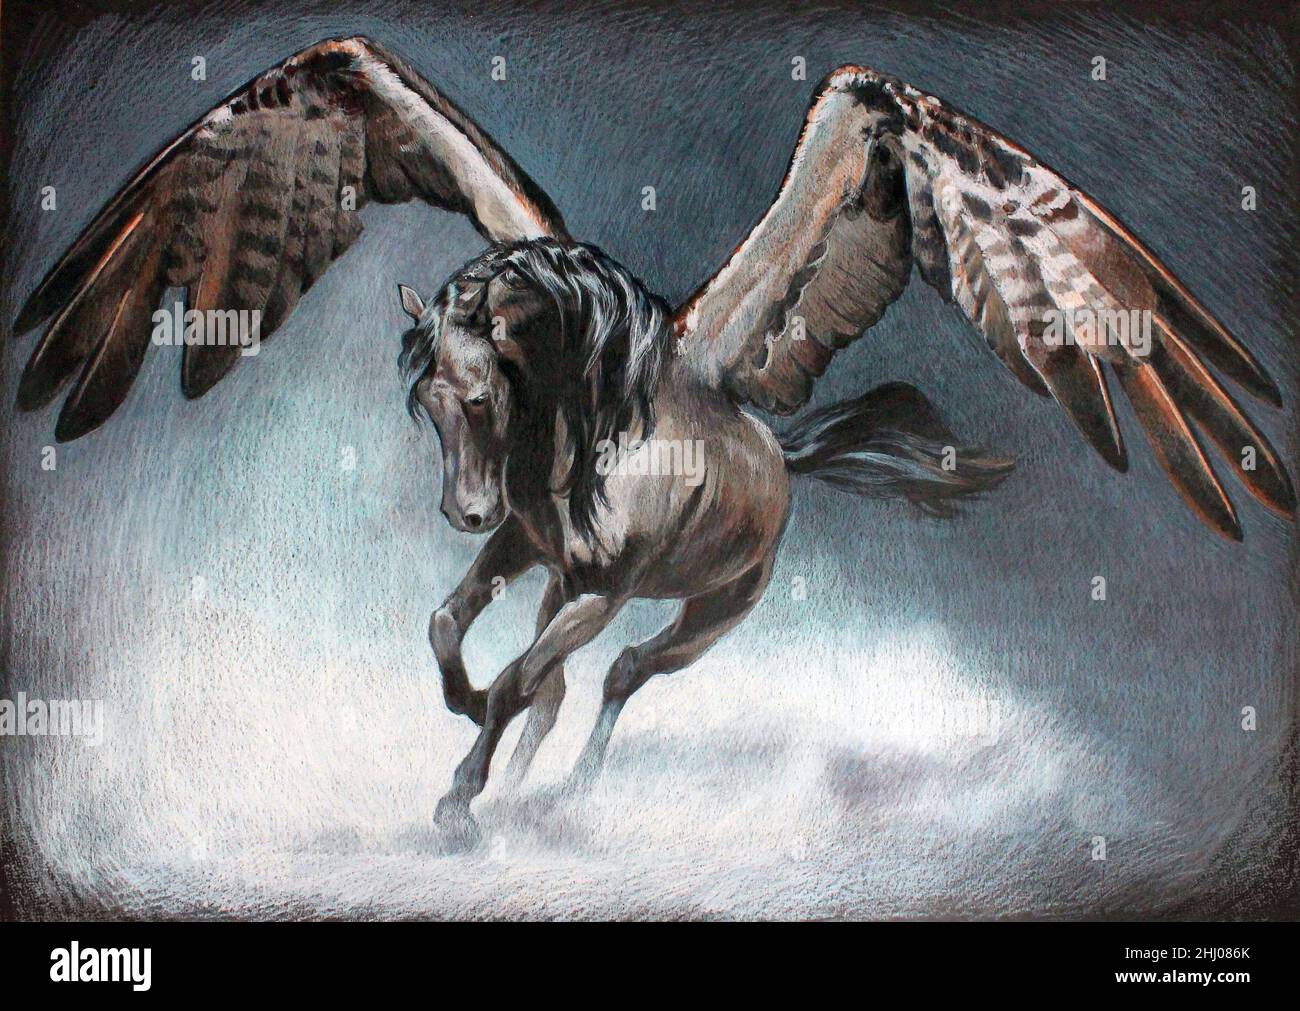 A beautiful and majestic black pegasus spreads its wings for takeoff.  Drawing. Stock Photo